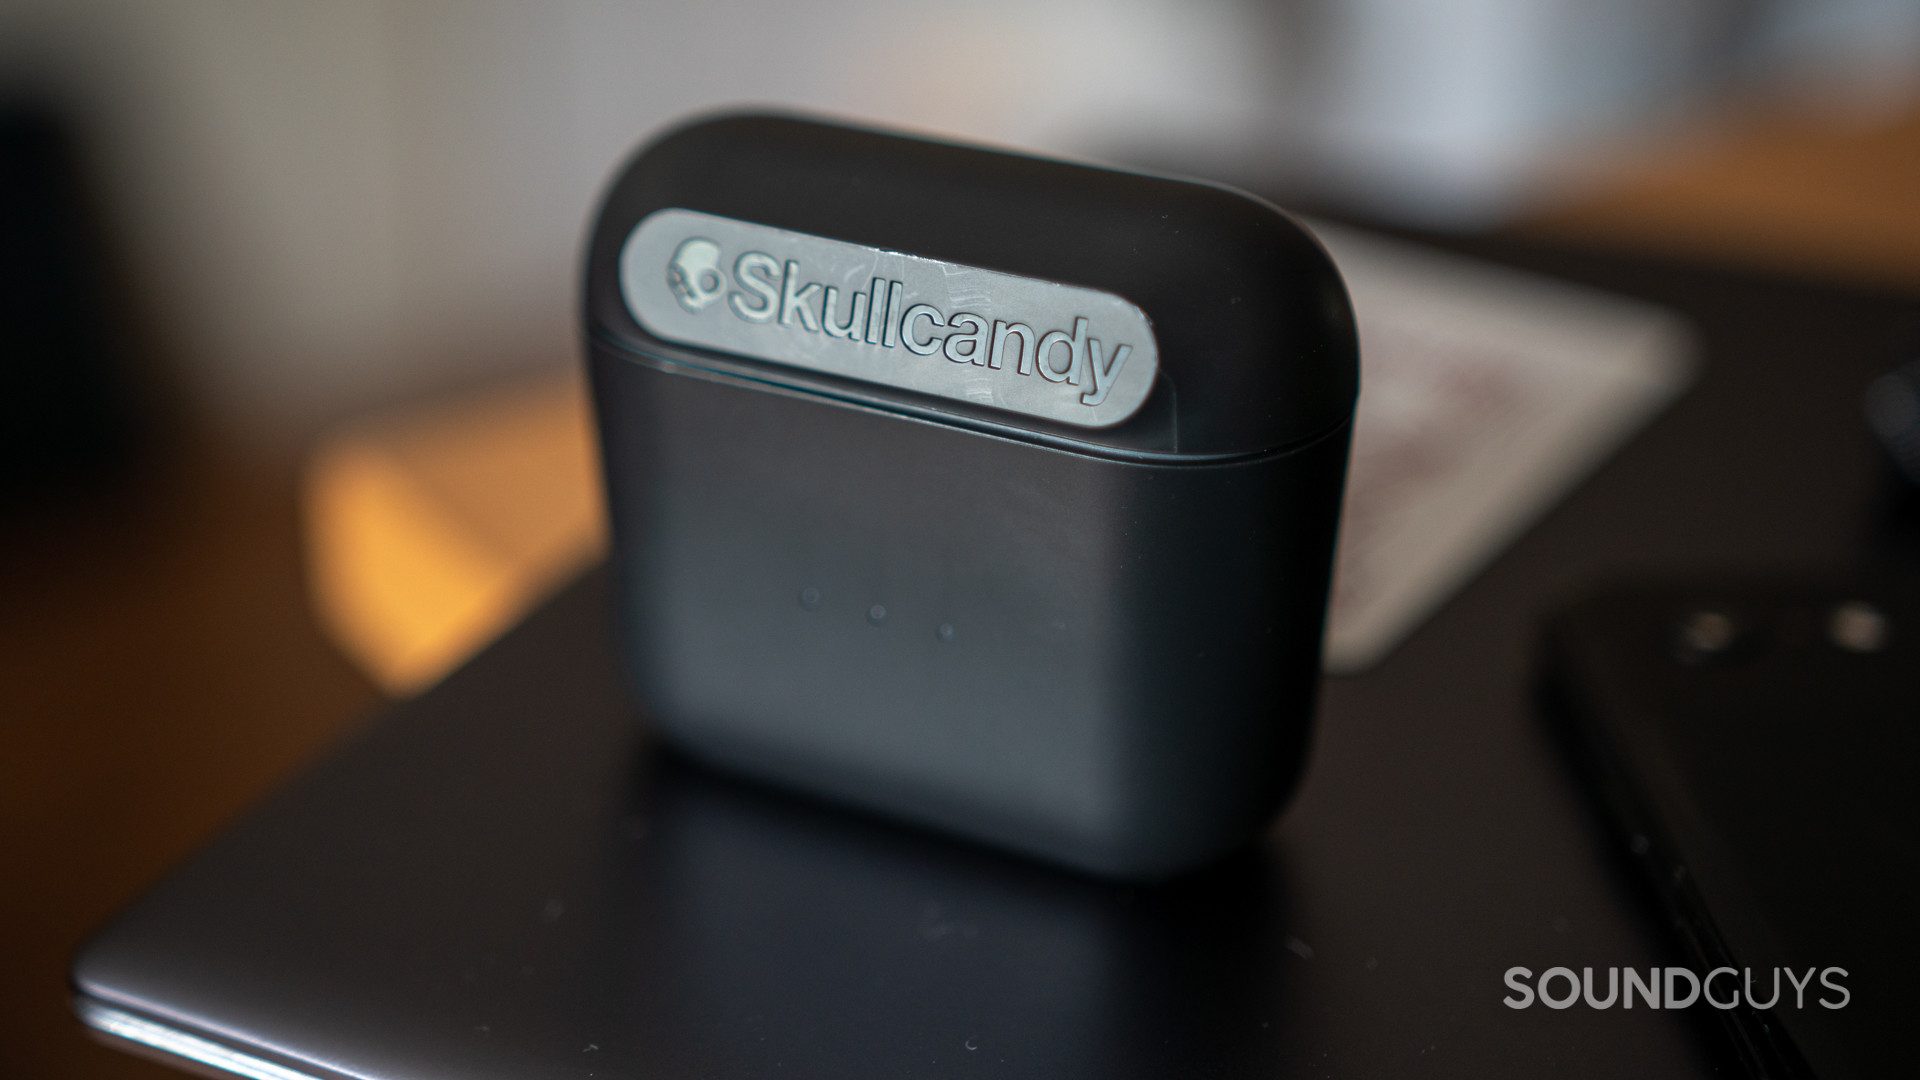 The Skullcandy Indy charging case from the front.